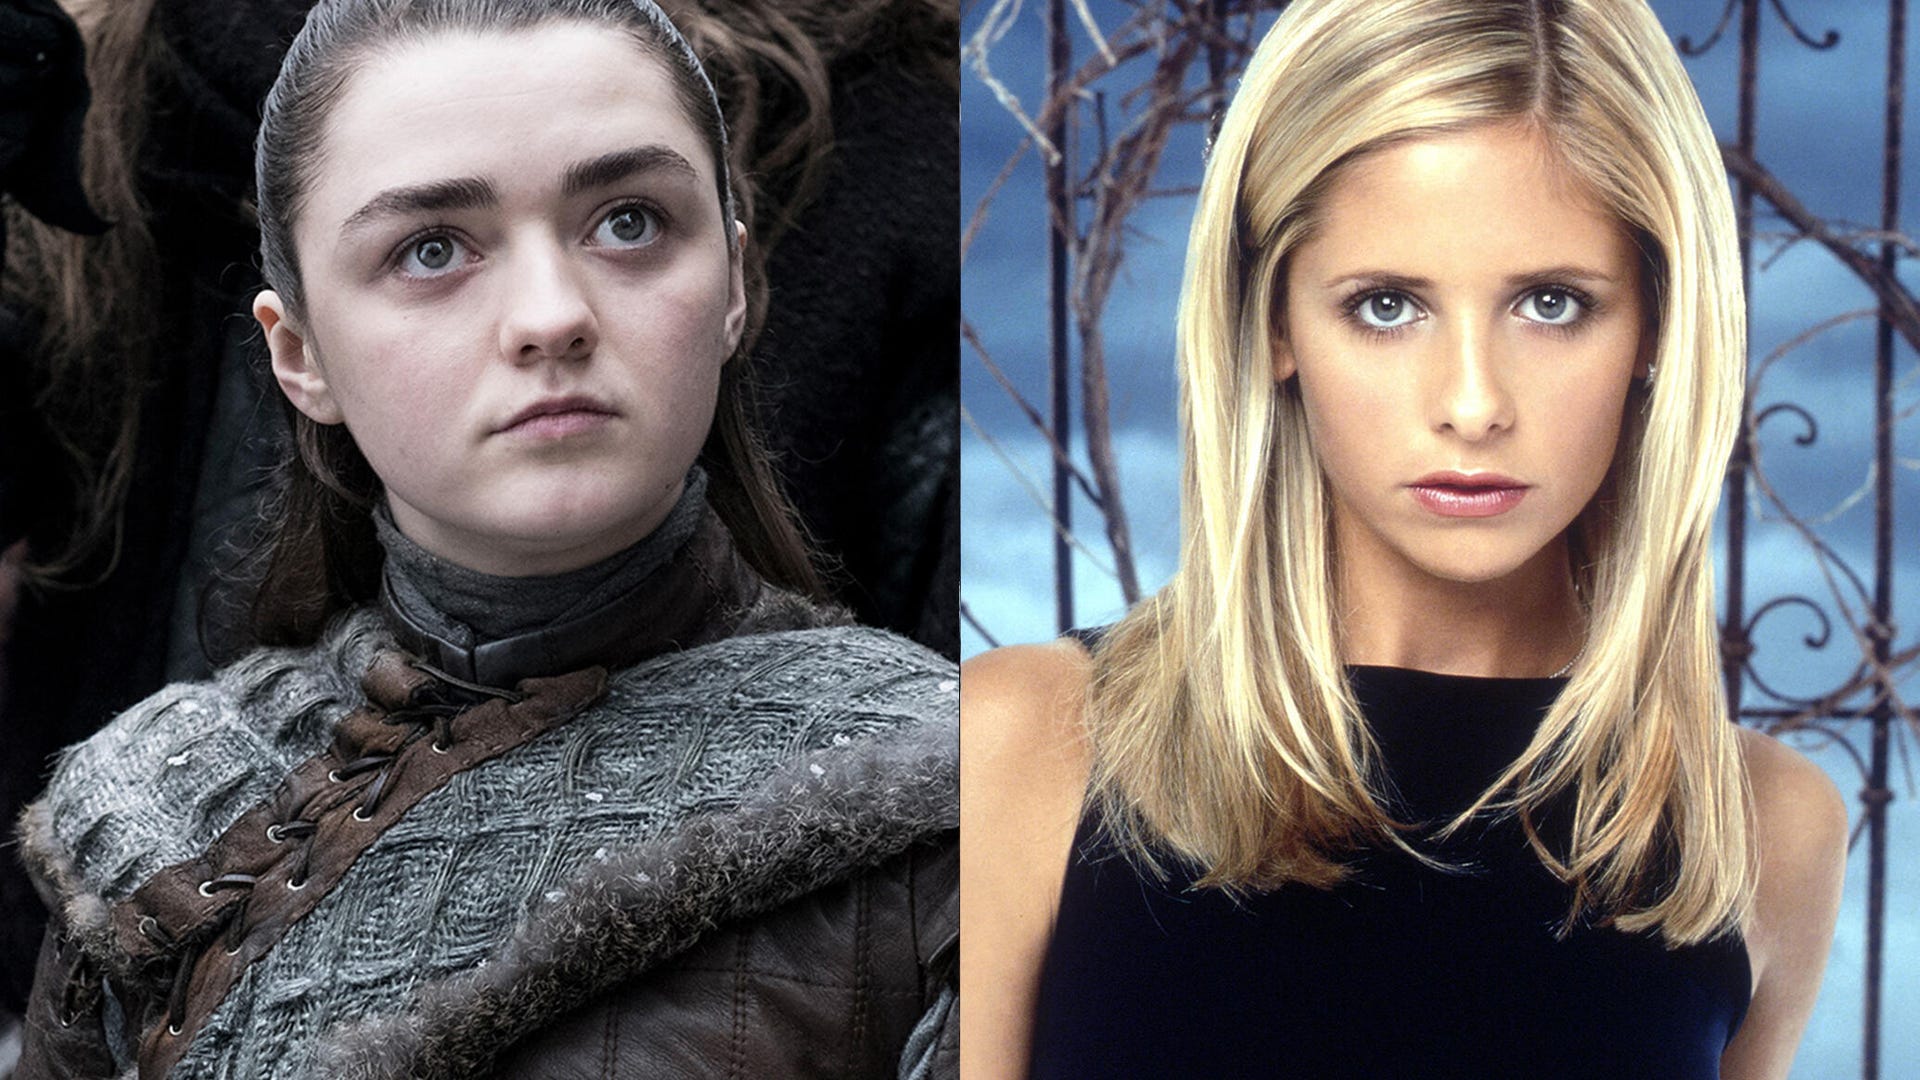 ​Maisie Williams in Game of Thrones and Sarah Michelle Gellar in Buffy the Vampire Slayer